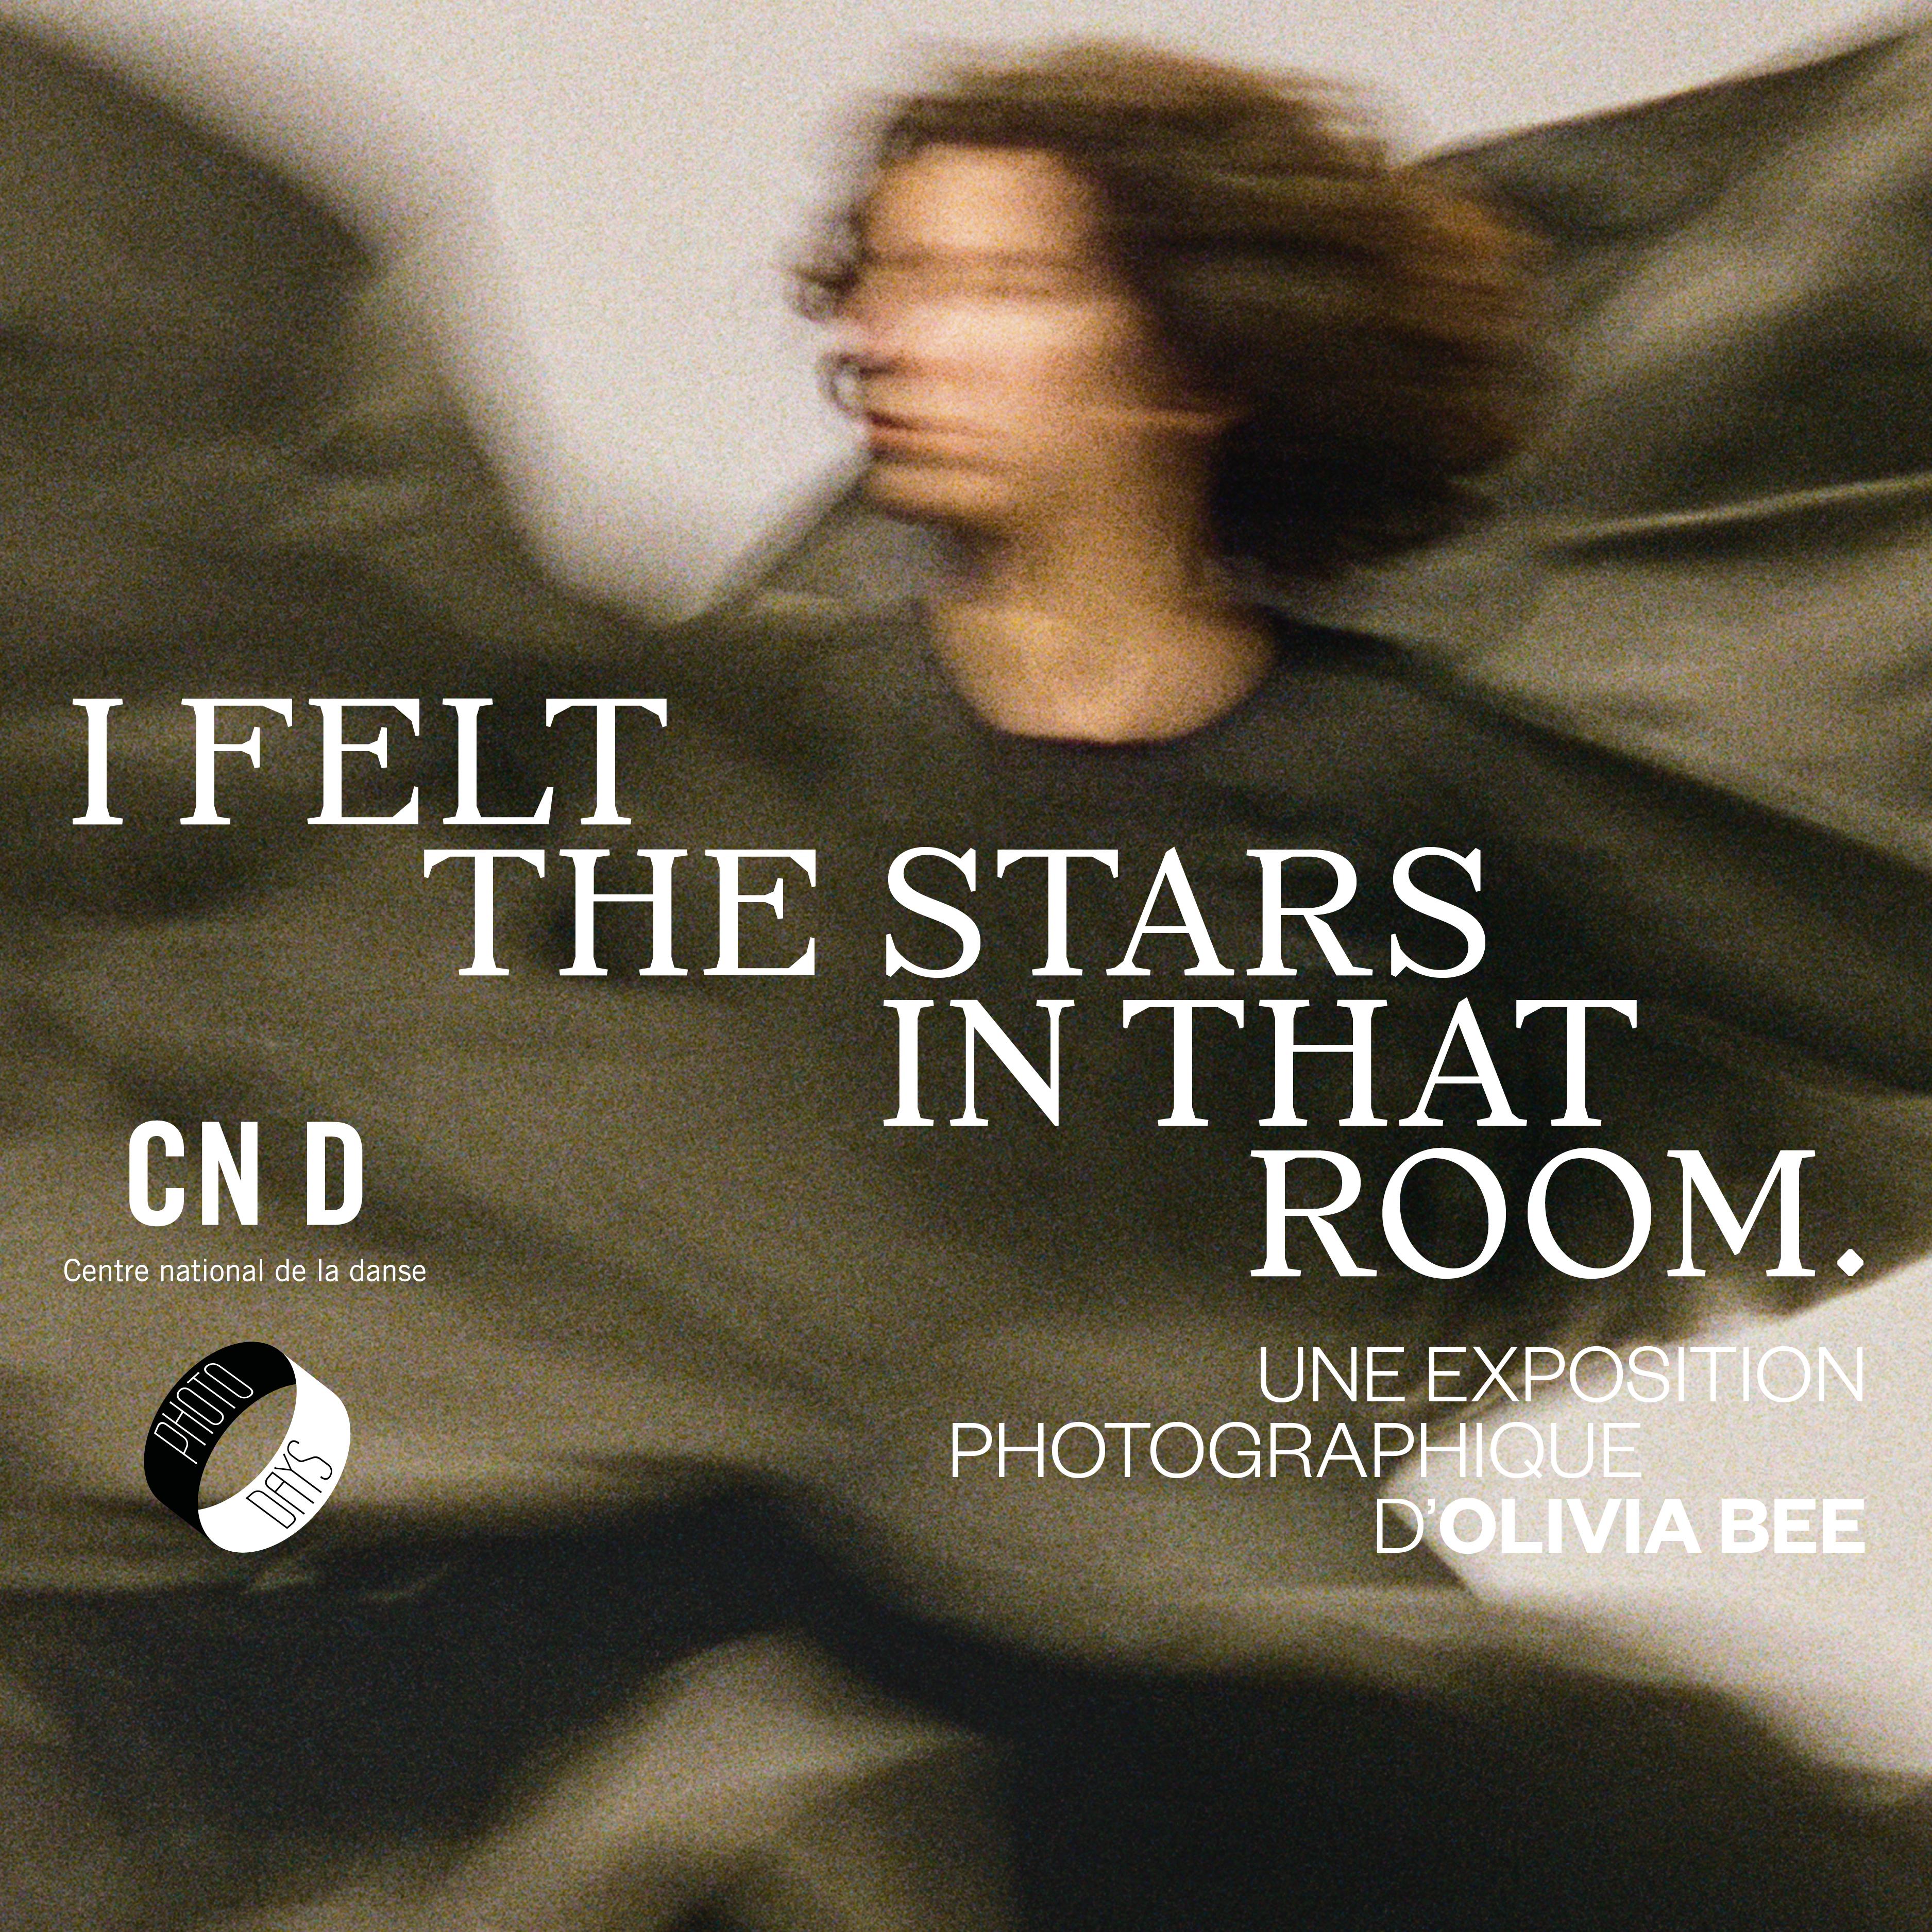 Affiche de l'exposition "I felt the stars in that room" d'Olivia Bee